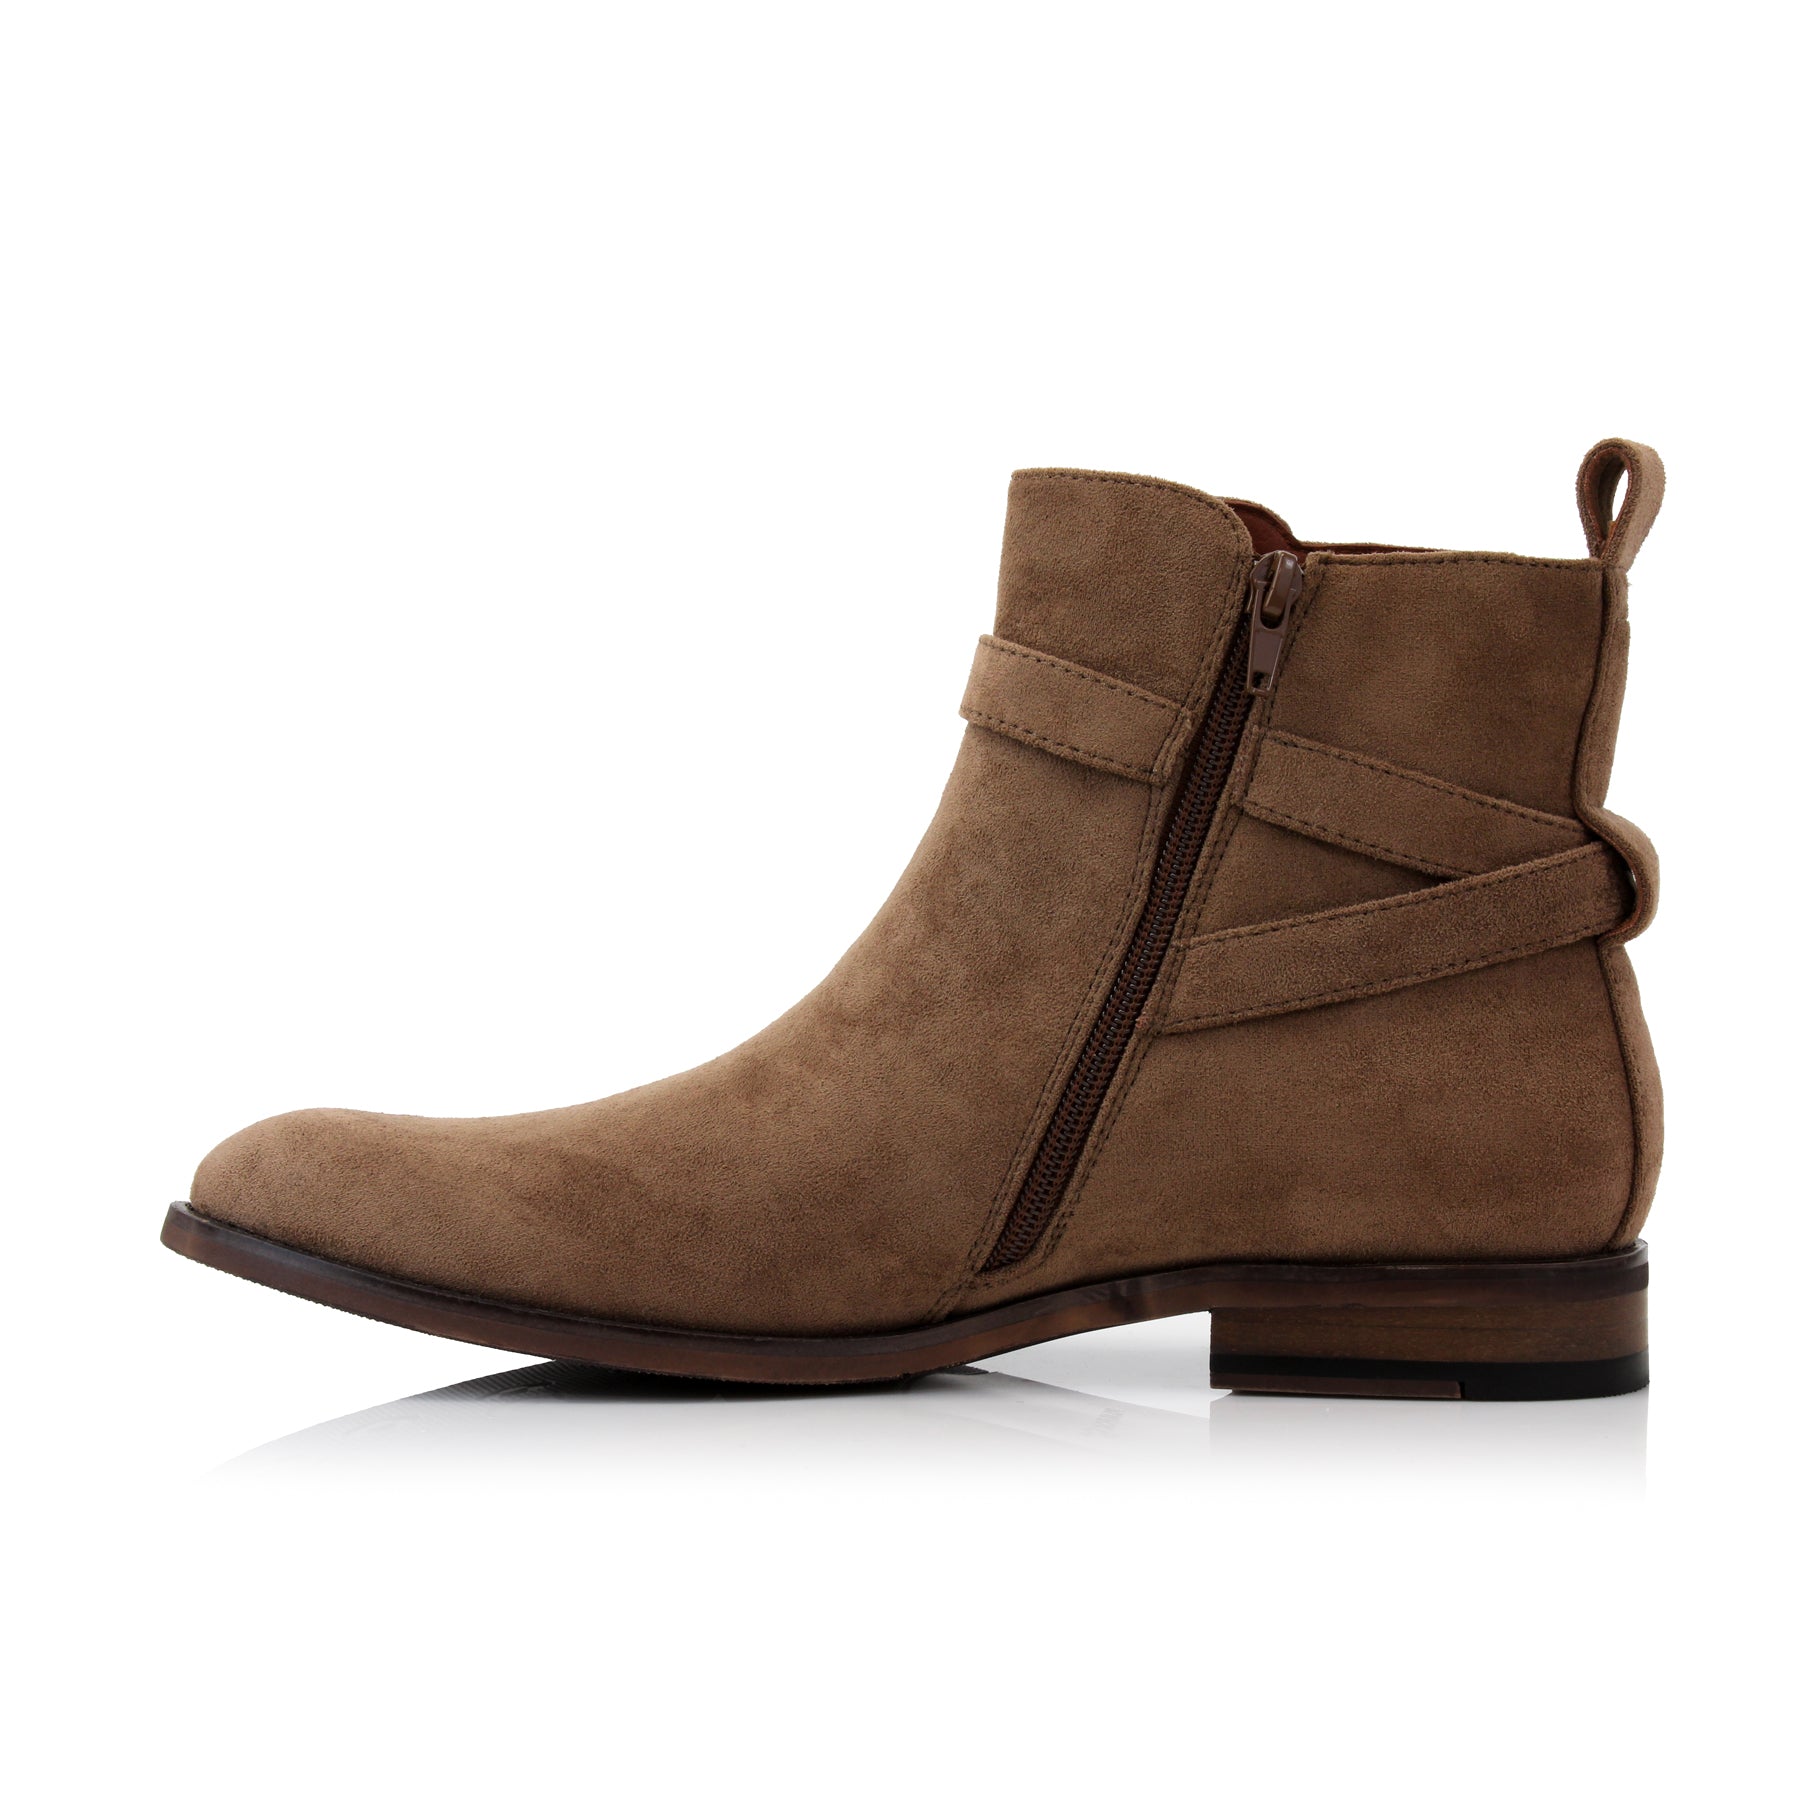 Strapped Suede Chelsea Boots | Derrick by Polar Fox | Conal Footwear | Inner Side Angle View